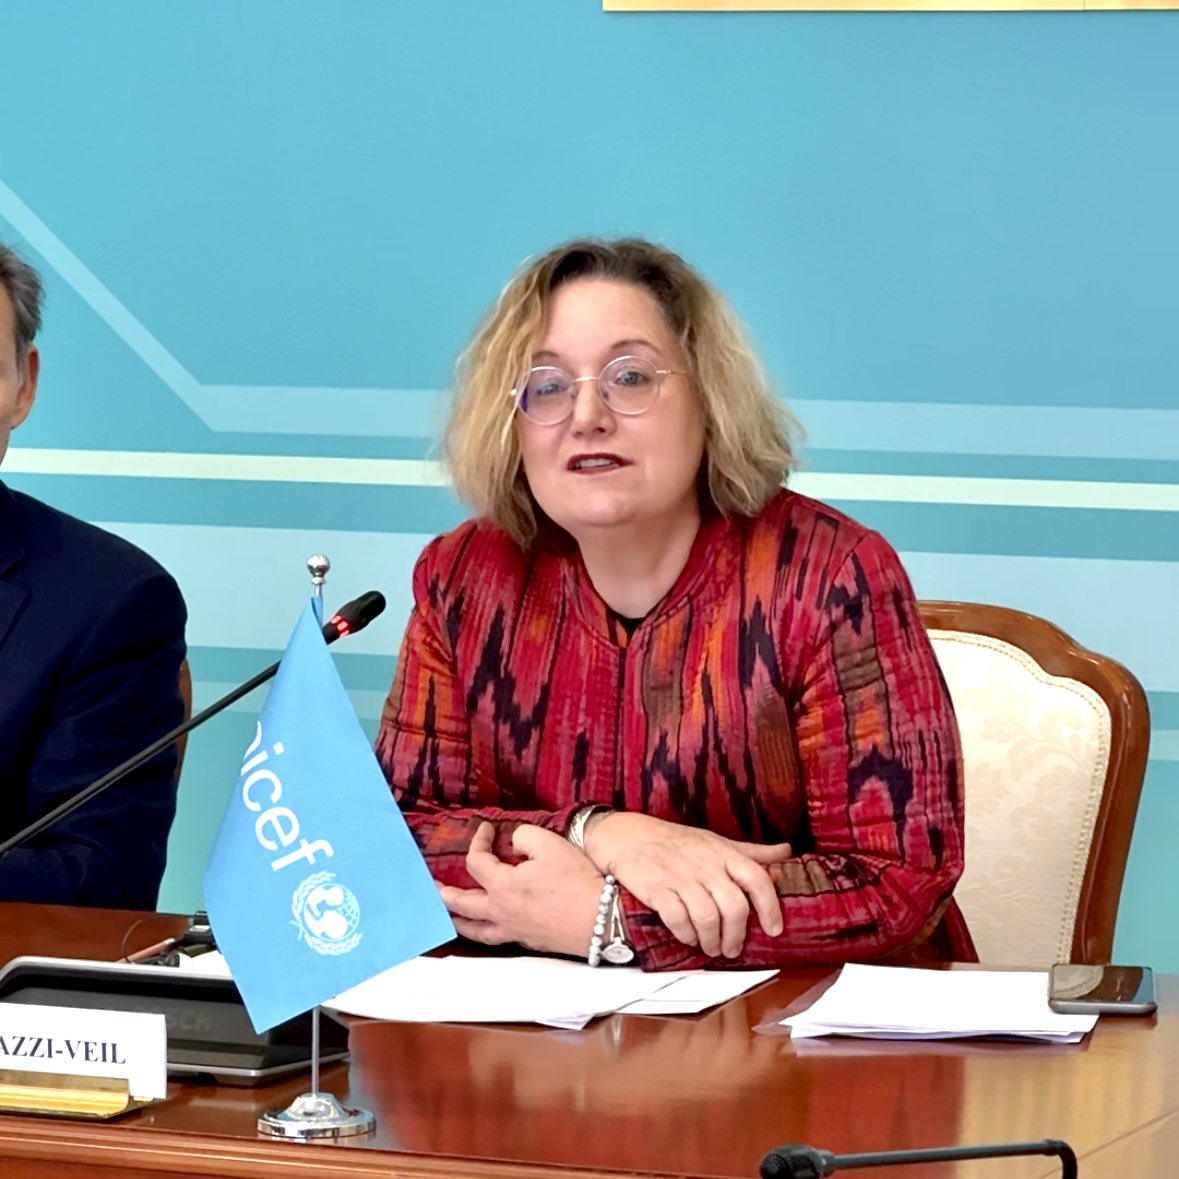 “Our goal is to ensure that all returnee children continue to receive the support to recover from their experiences and able to learn, develop, and adapt in 🇰🇿” said Laetitia Bazzi-Vale, OIC UNICEF Representative in 🇰🇿 at the coordination meeting with @EUinKazakhstan and @MFA_KZ